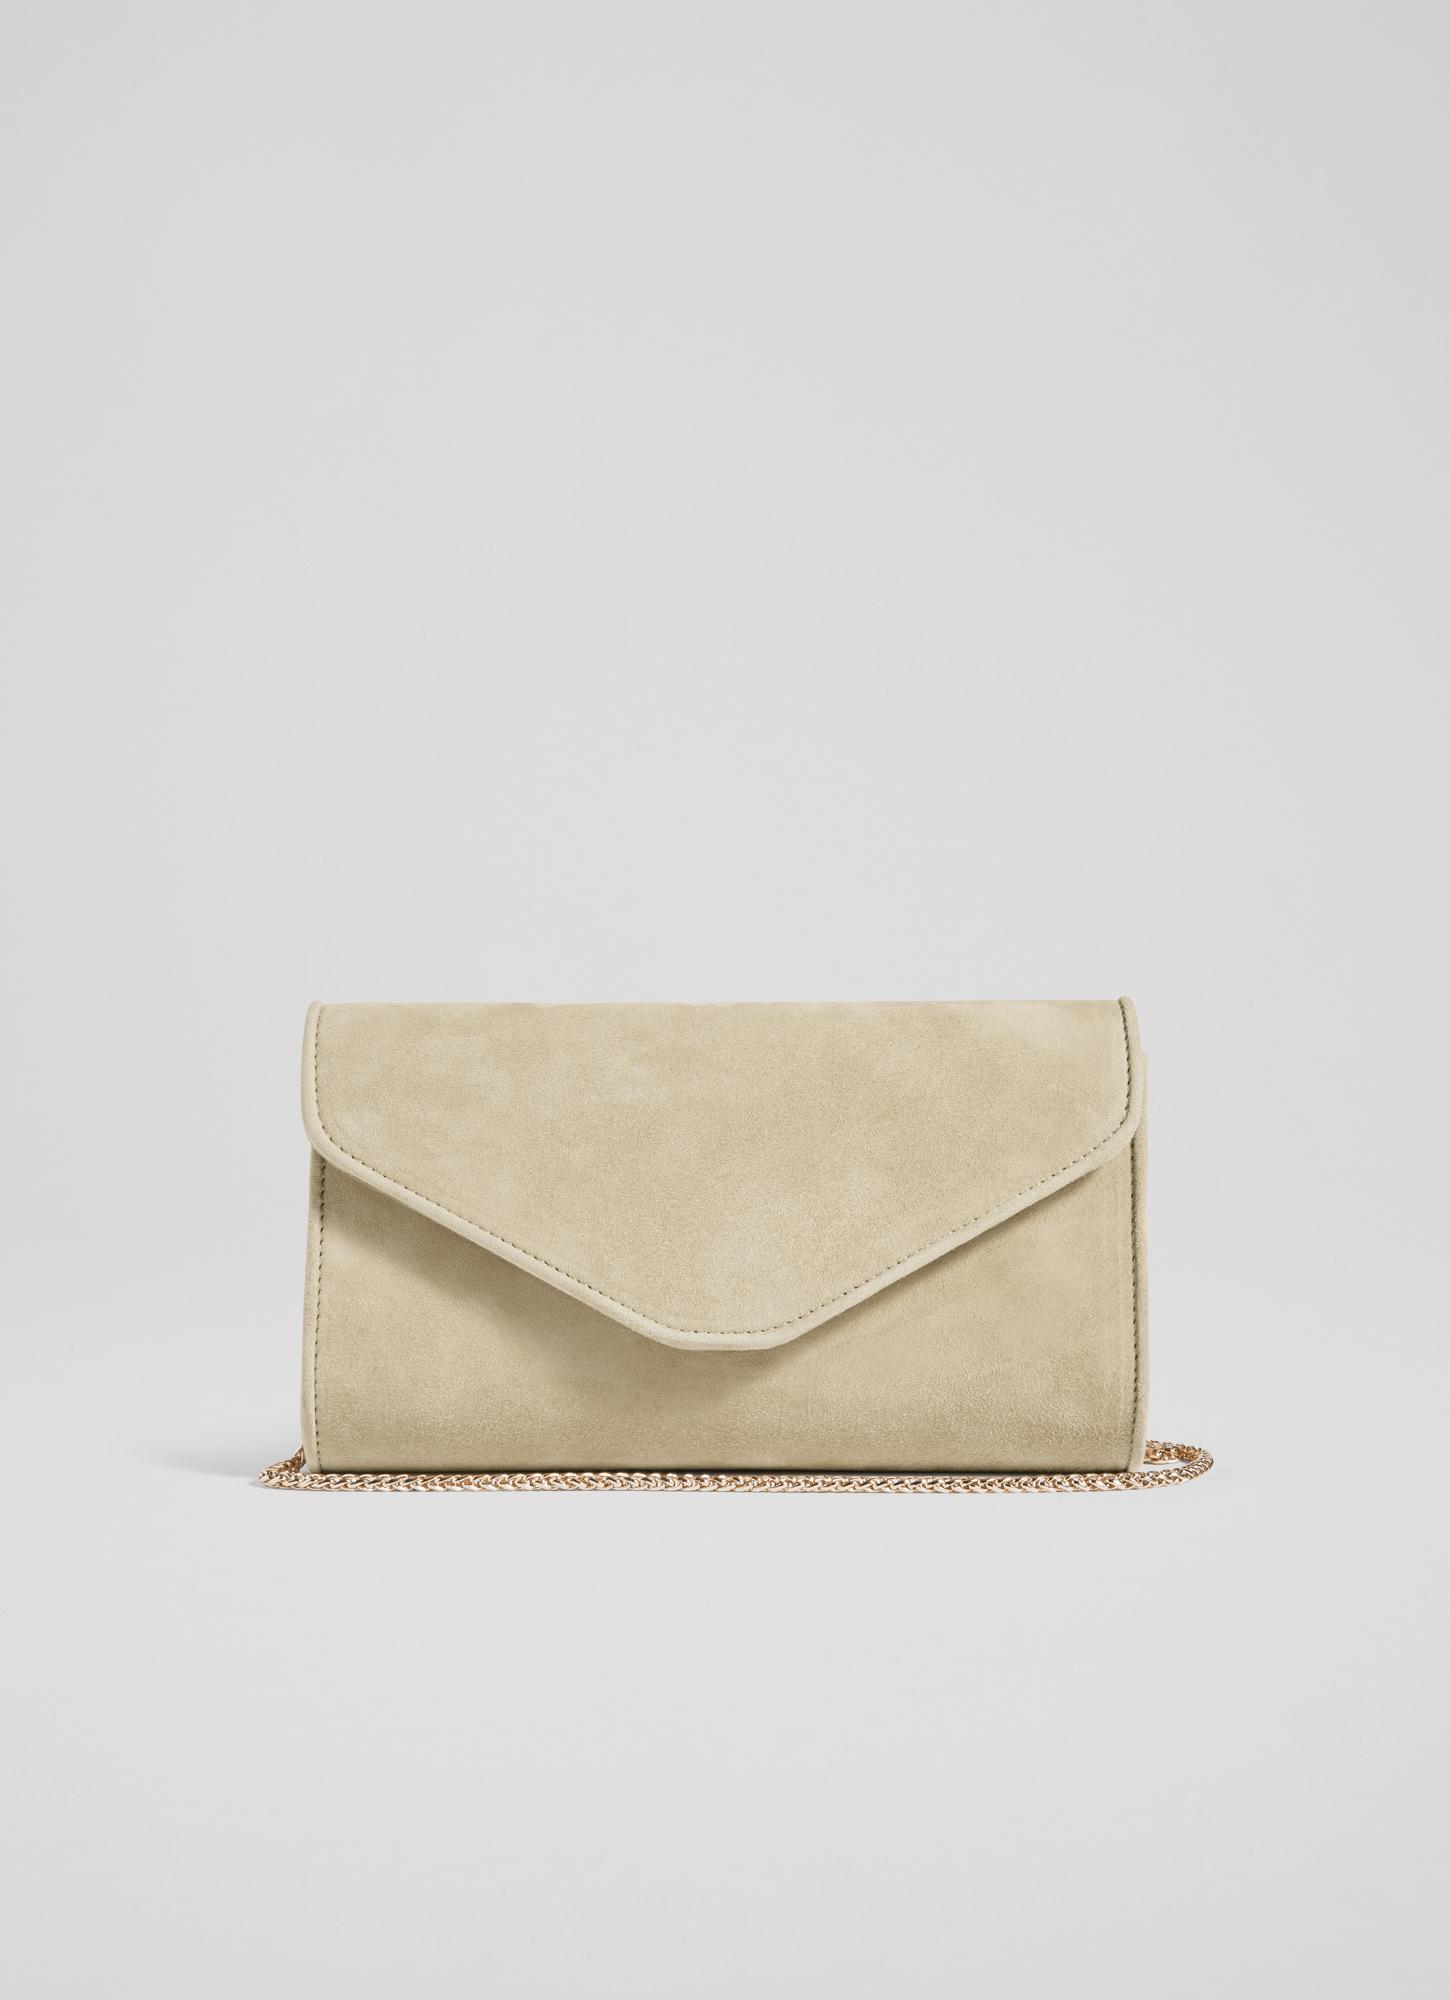 L.K.Bennett Dominica Beige Suede Clutch Bag Trench, Trench